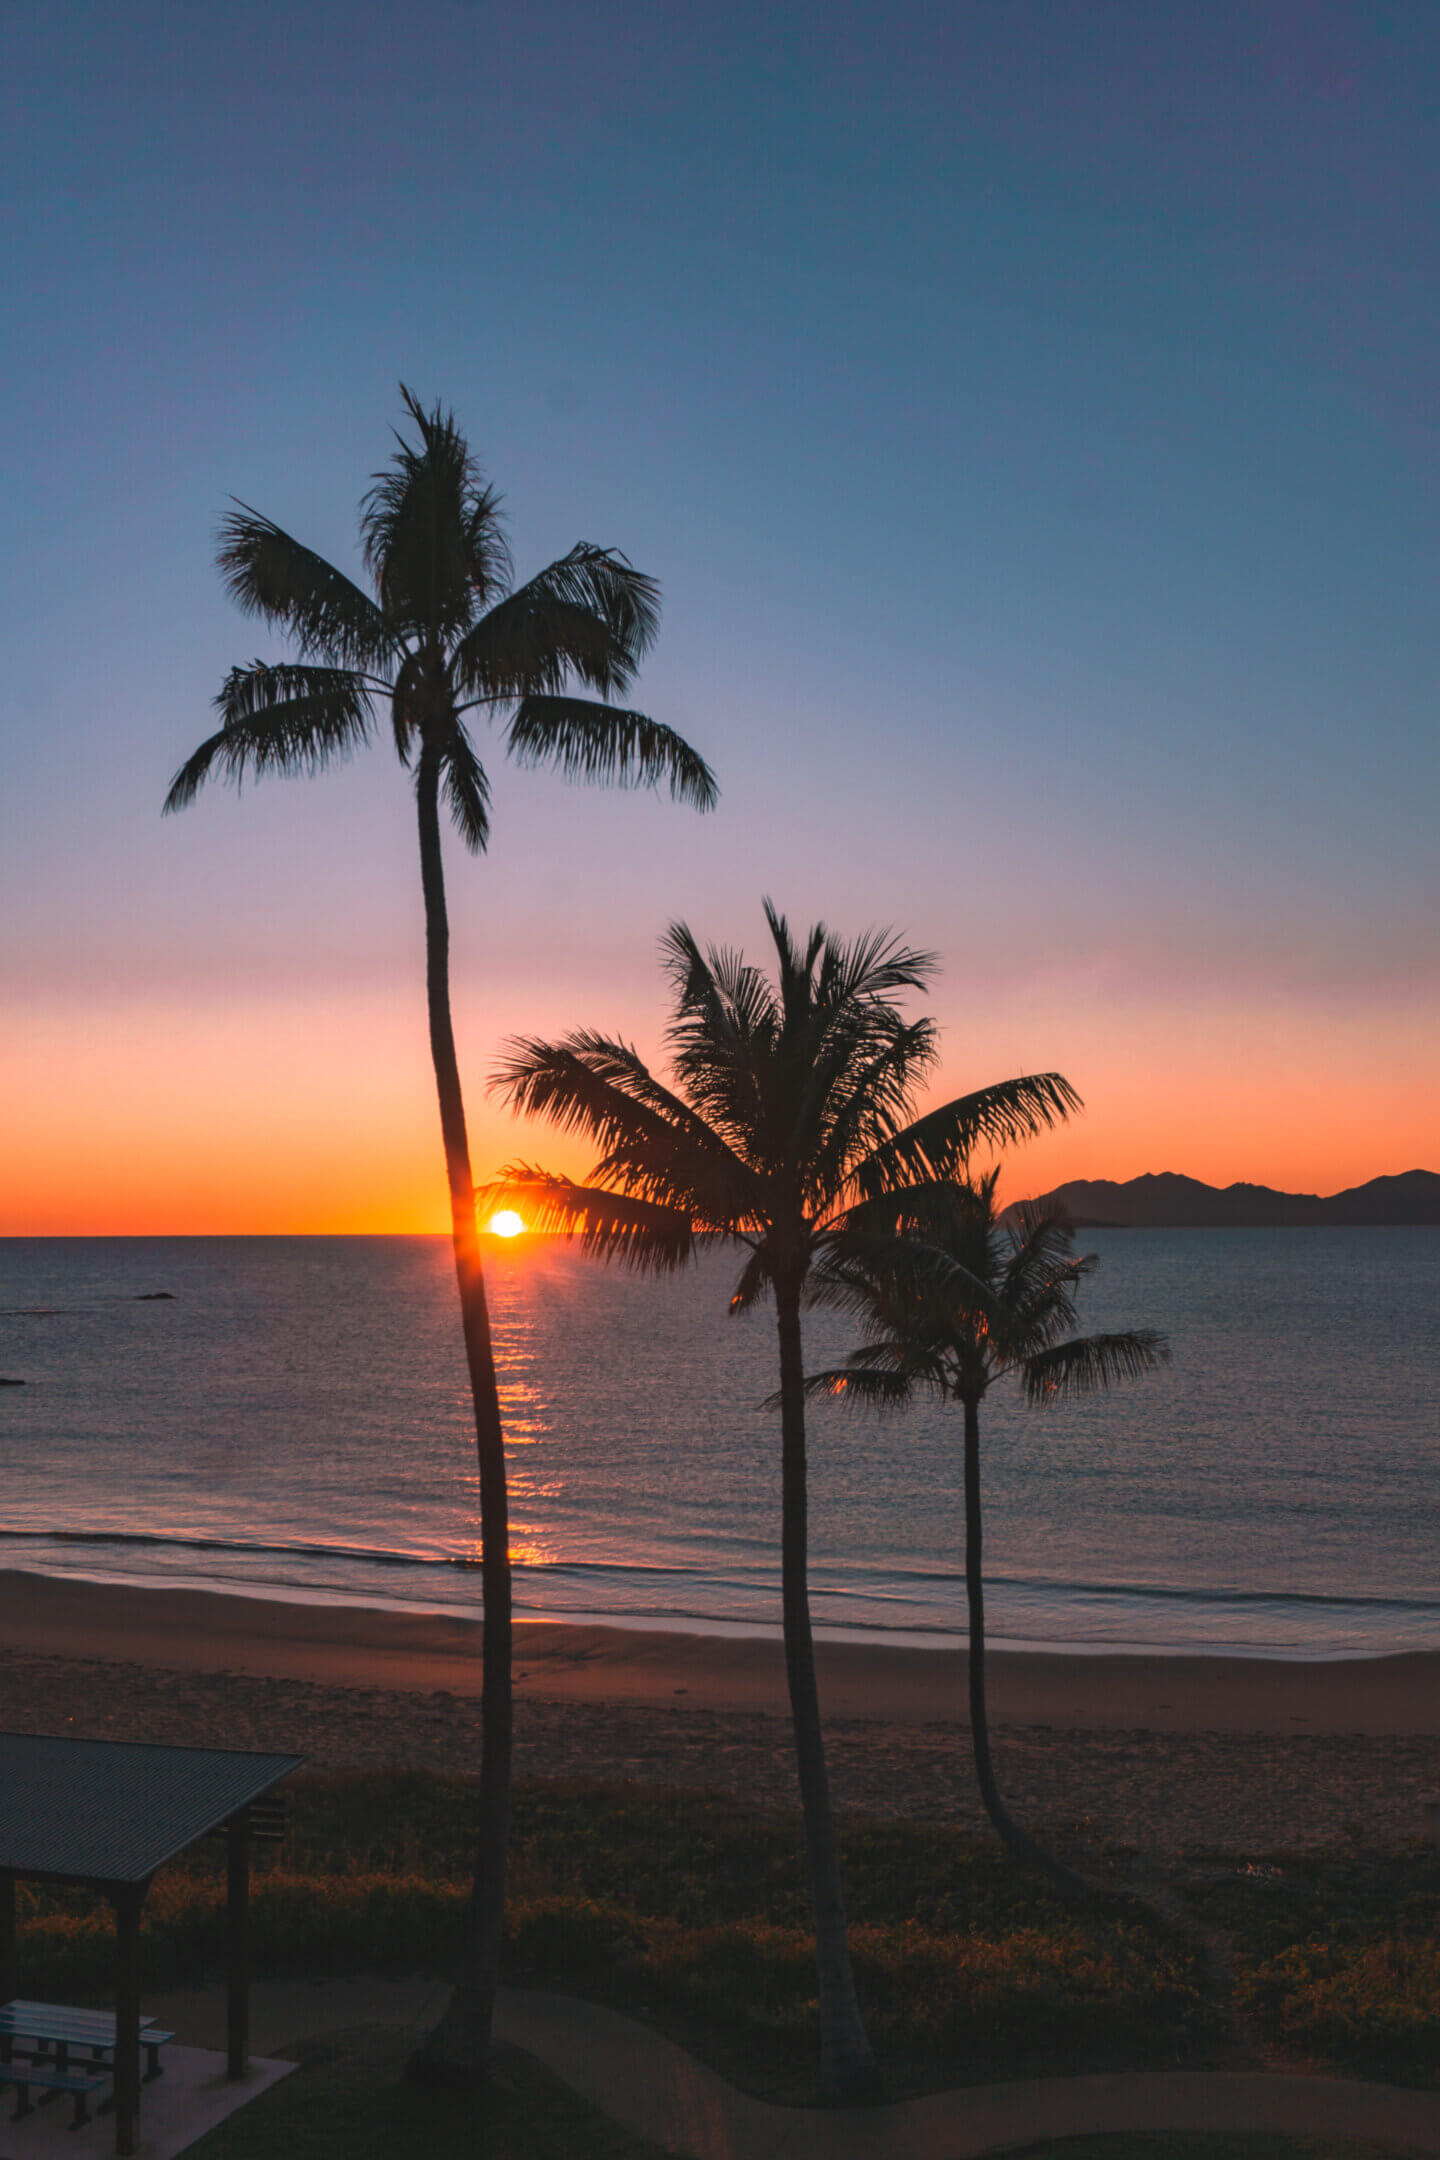 A beautiful sunrise poking through the palm trees in Bowen Queensland